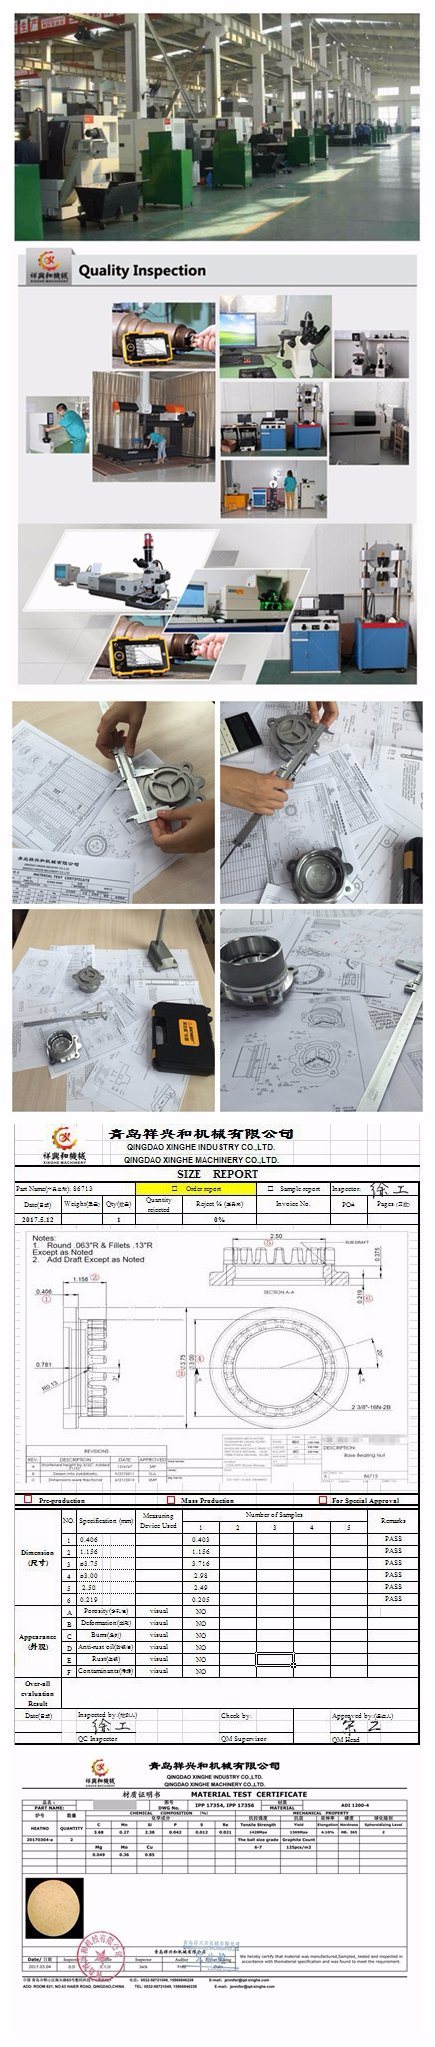 OEM Aluminum/Copper/Iron/Zinc/Stainless Steel Casting/Forging Auto Wheel Hub for Car Part